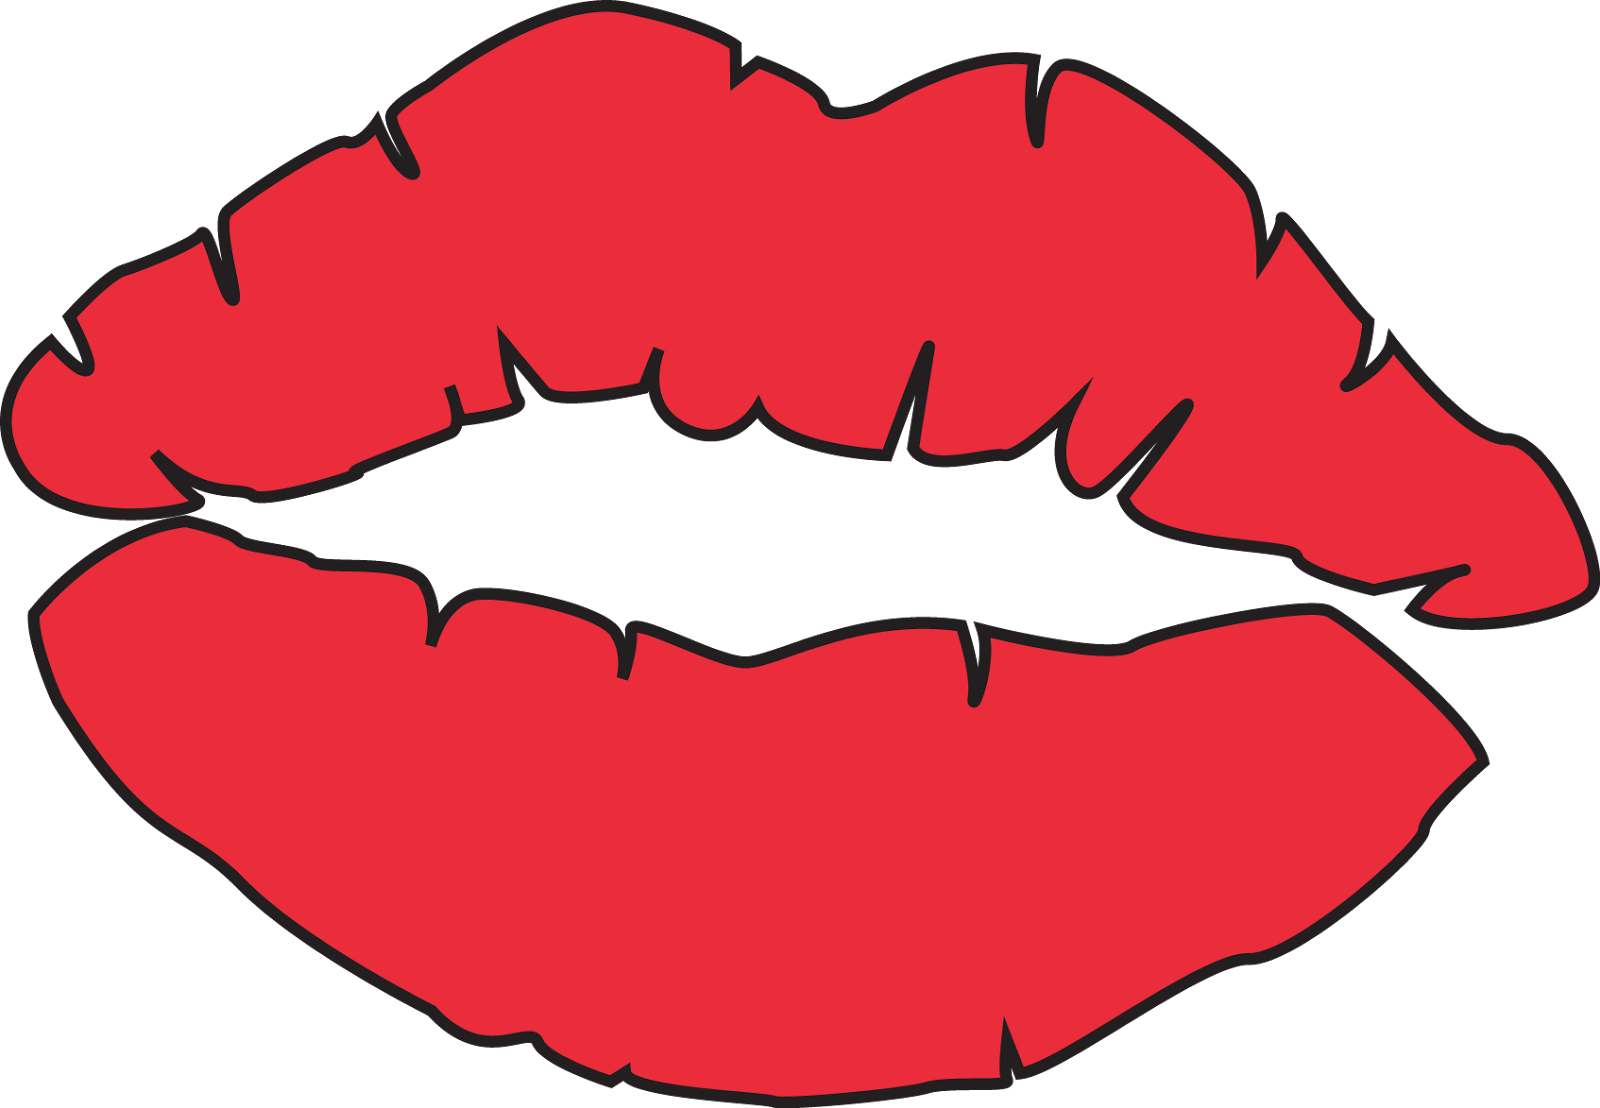 Free Lips Coloring Pages, Download Free Lips Coloring Pages png images